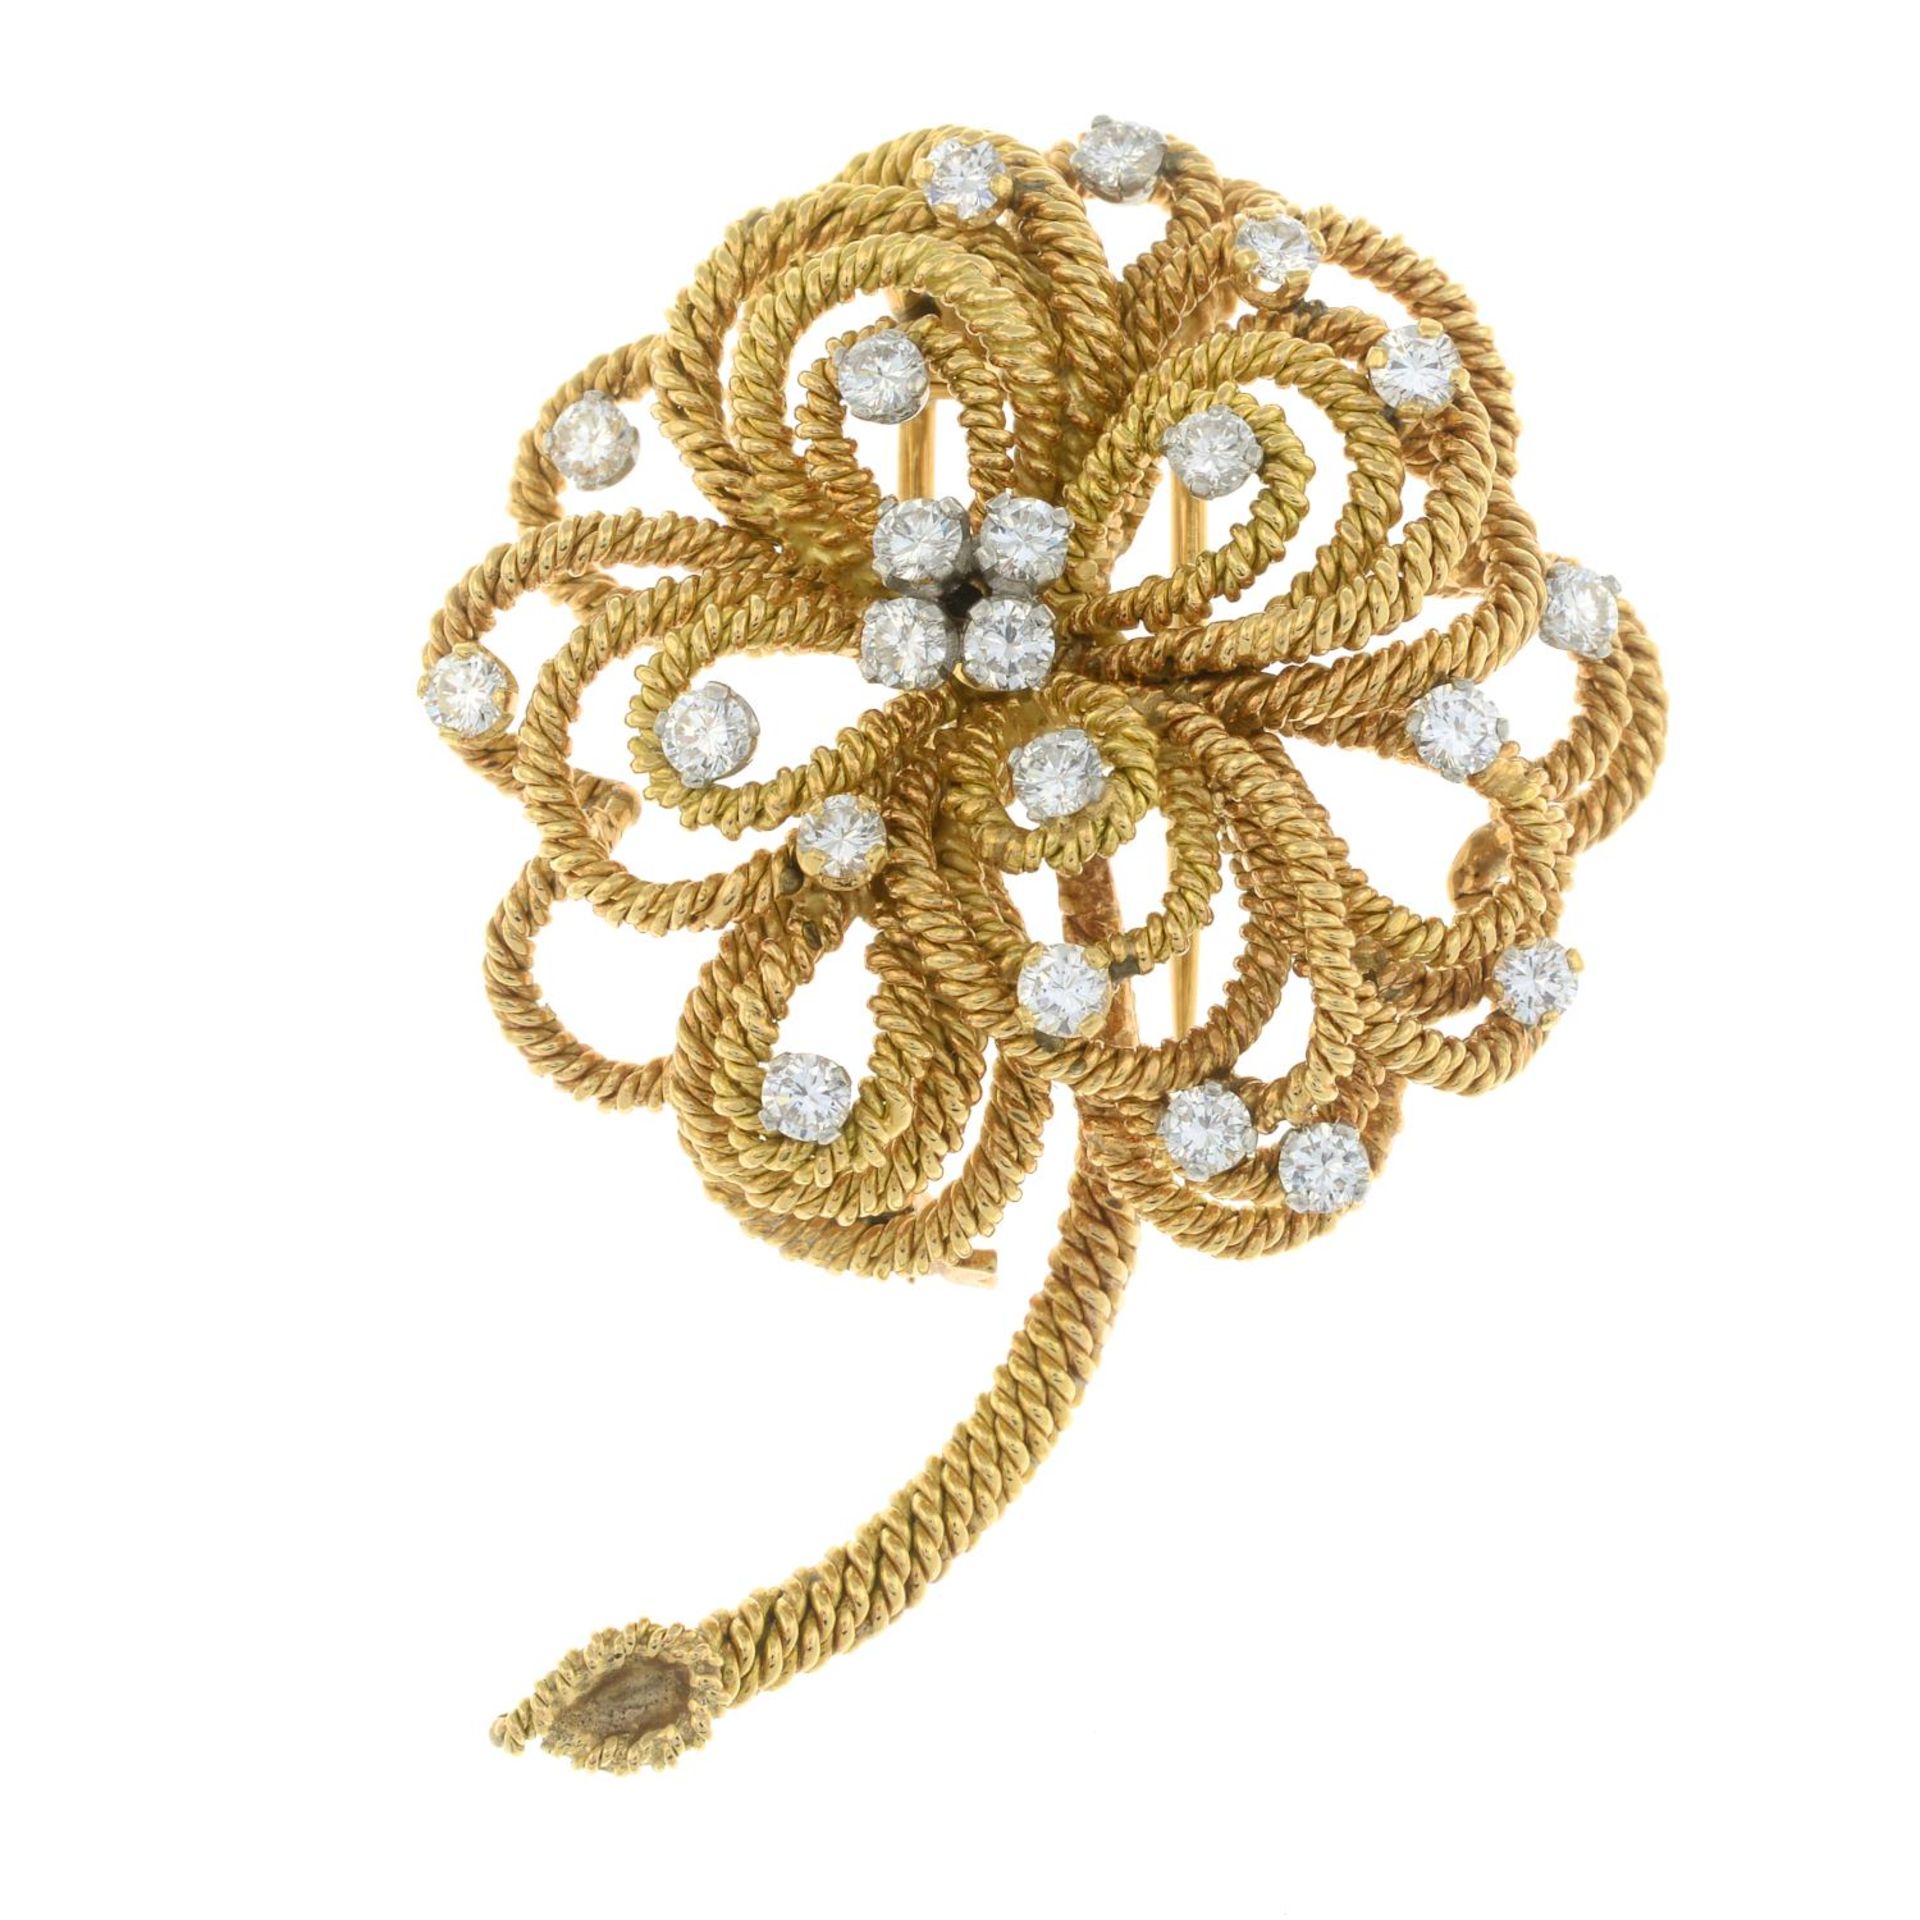 A mid 20th century diamond floral brooch, by Vourakis. - Image 2 of 6